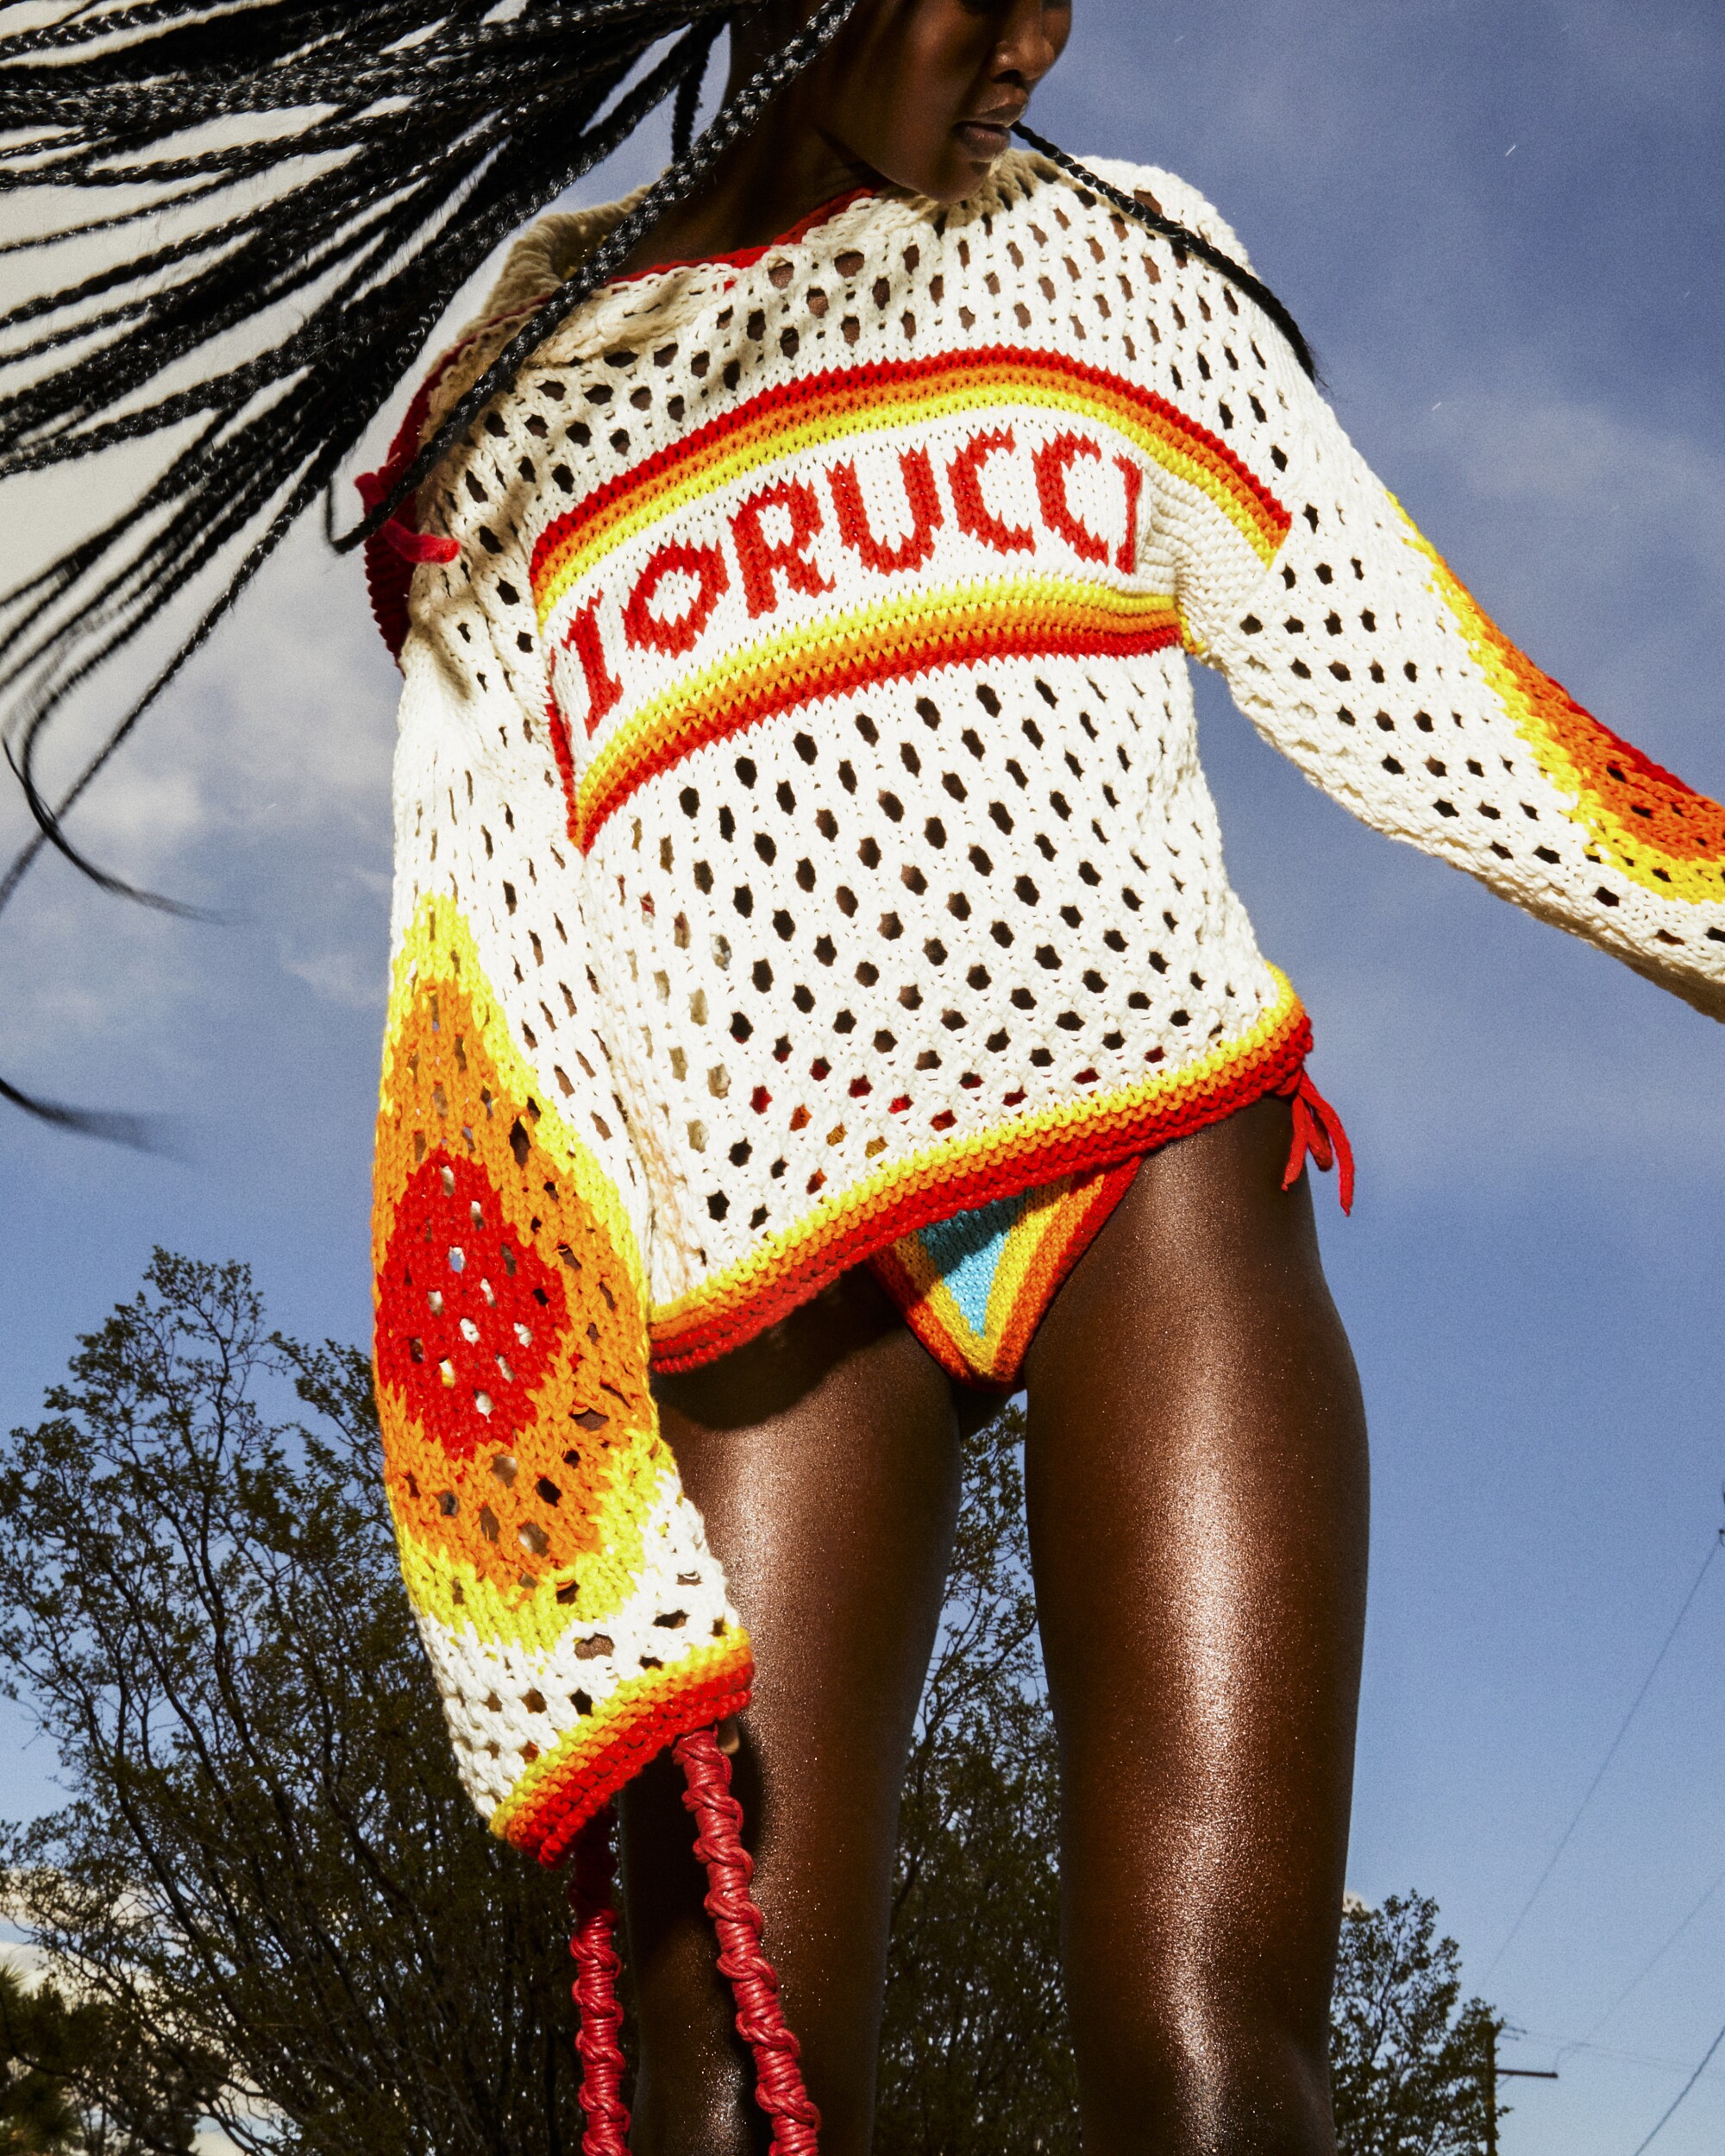 Italian brand Fiorucci is introducing the SS22 Desert Oasis collection for Fred Segal right in the near future Coachella.